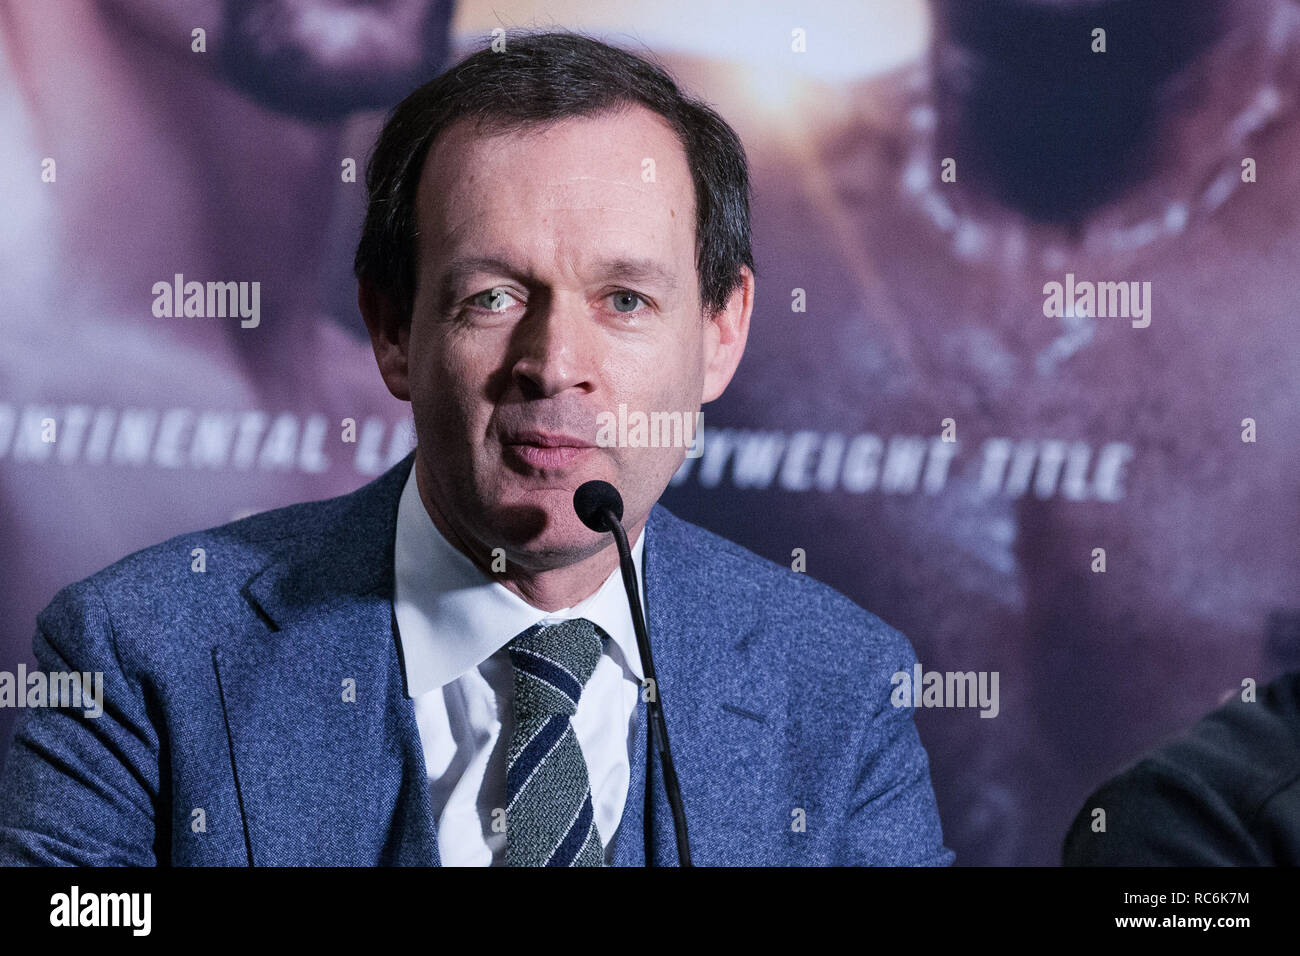 London, UK. 14th January, 2019. Adam Smith, Head of Boxing at Sky Sports, speaks at the press conference for a Matchroom Boxing bill at the 02 on 2nd February headed by a European Super-Welterweight Championship fight between Sergio Garcia and Ted Cheeseman. Credit: Mark Kerrison/Alamy Live News Stock Photo